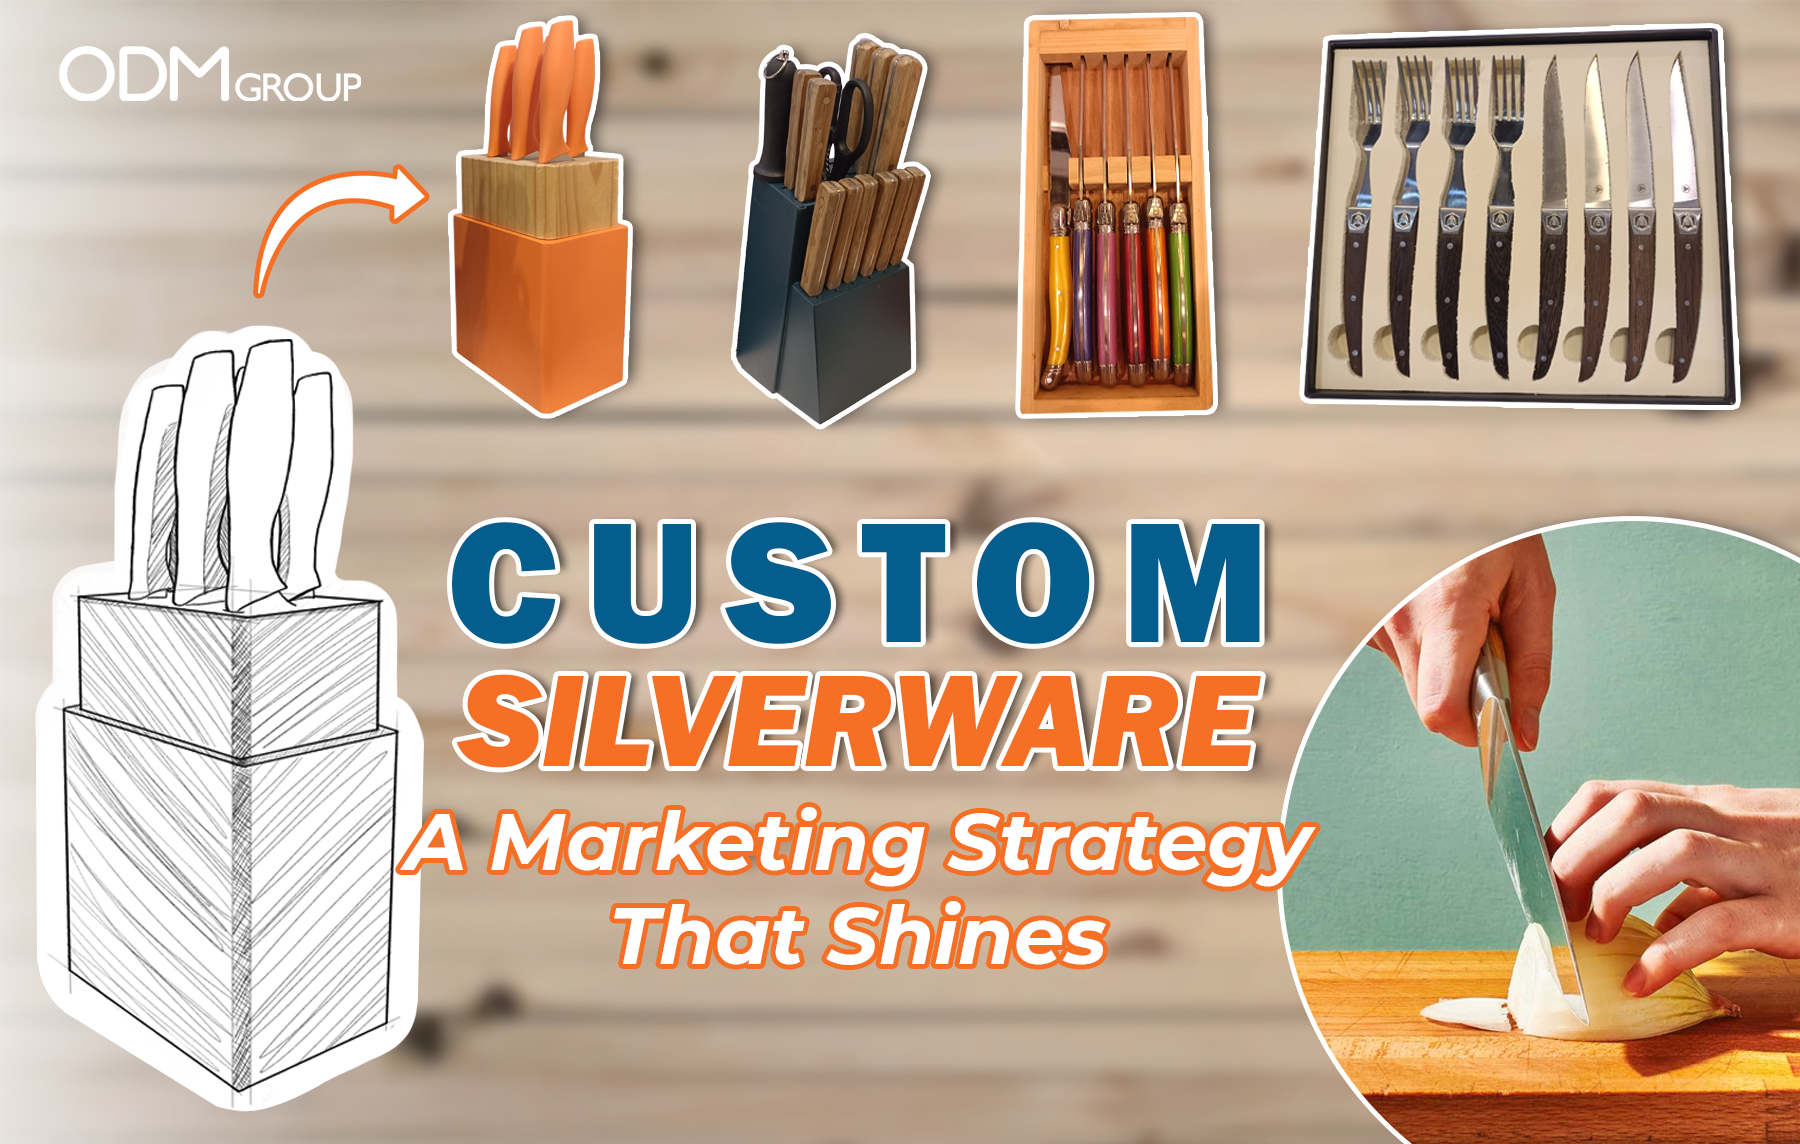 Shining Impressions: Custom Silverware as Premium Client Gifts